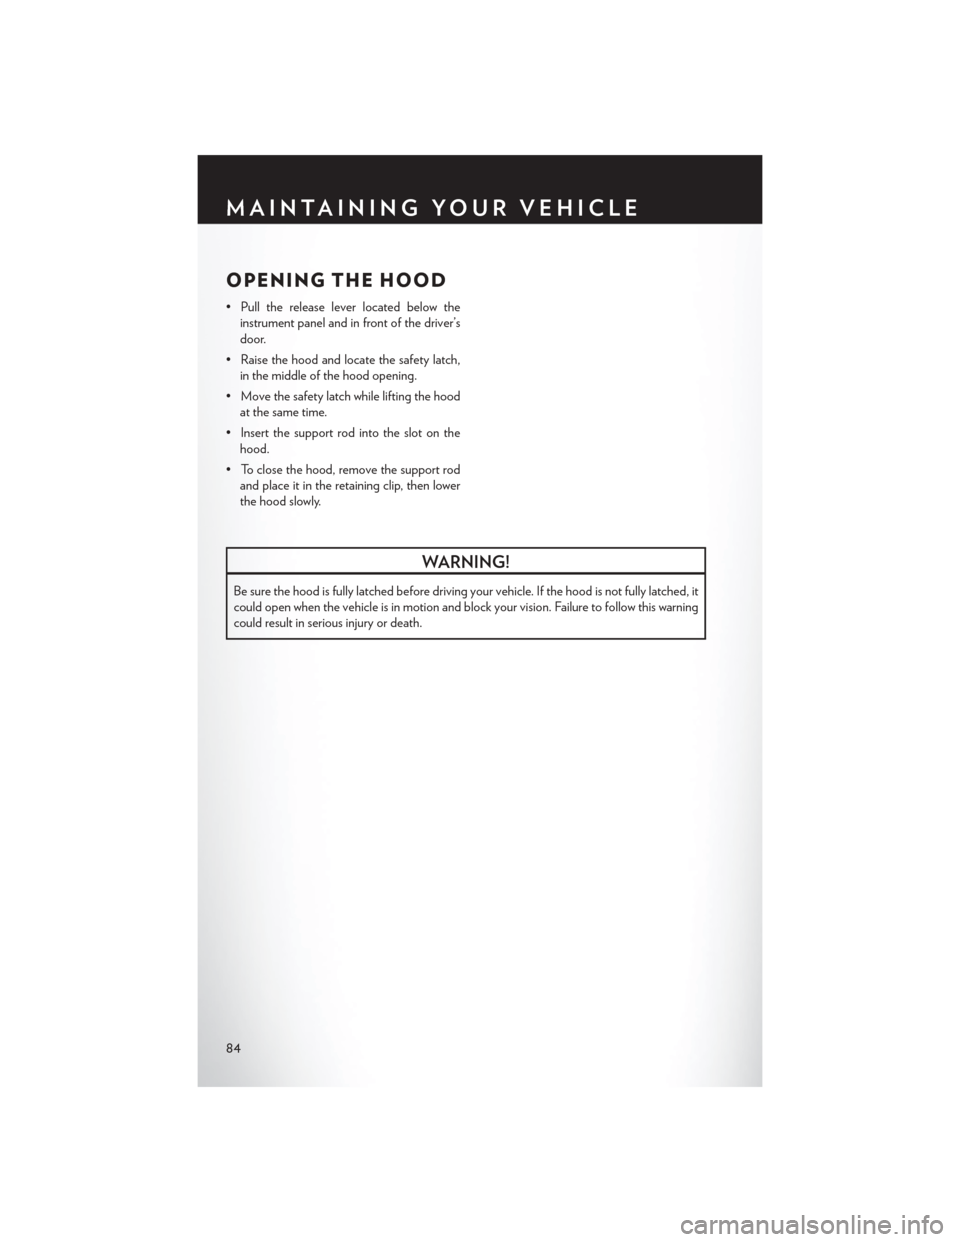 CHRYSLER 200 2013 1.G User Guide OPENING THE HOOD
• Pull the release lever located below theinstrument panel and in front of the driver’s
door.
• Raise the hood and locate the safety latch, in the middle of the hood opening.
�